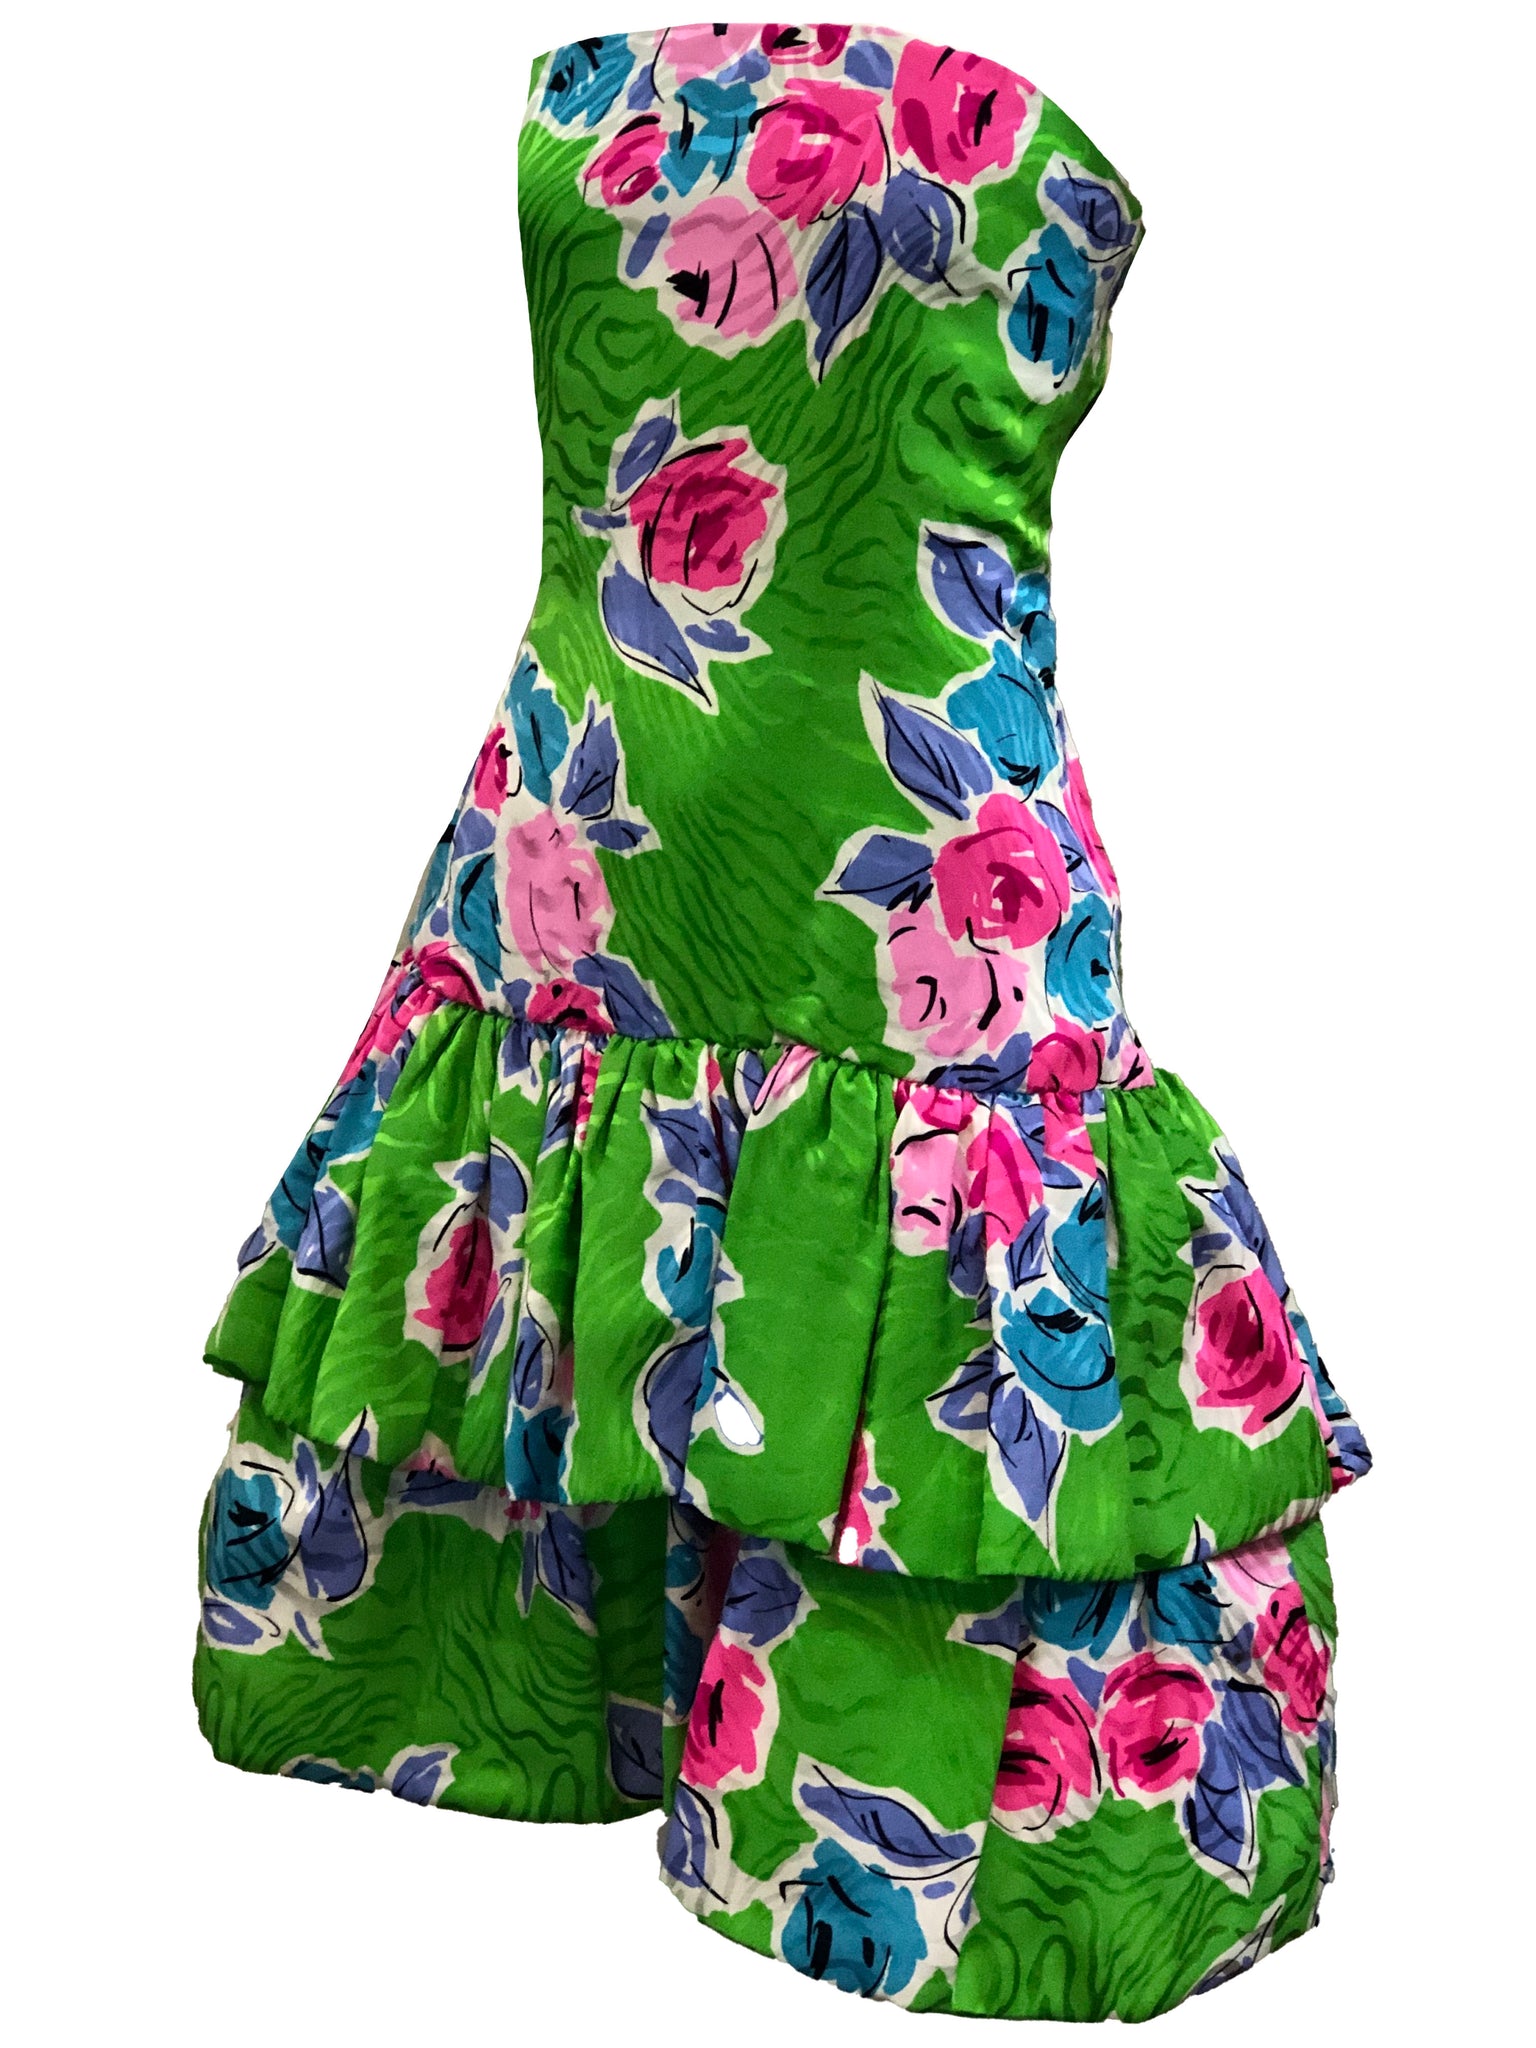 Arnold Scaasi 90s Green Floral Silk Strapless Cocktail Dress SIDE 2 of 5